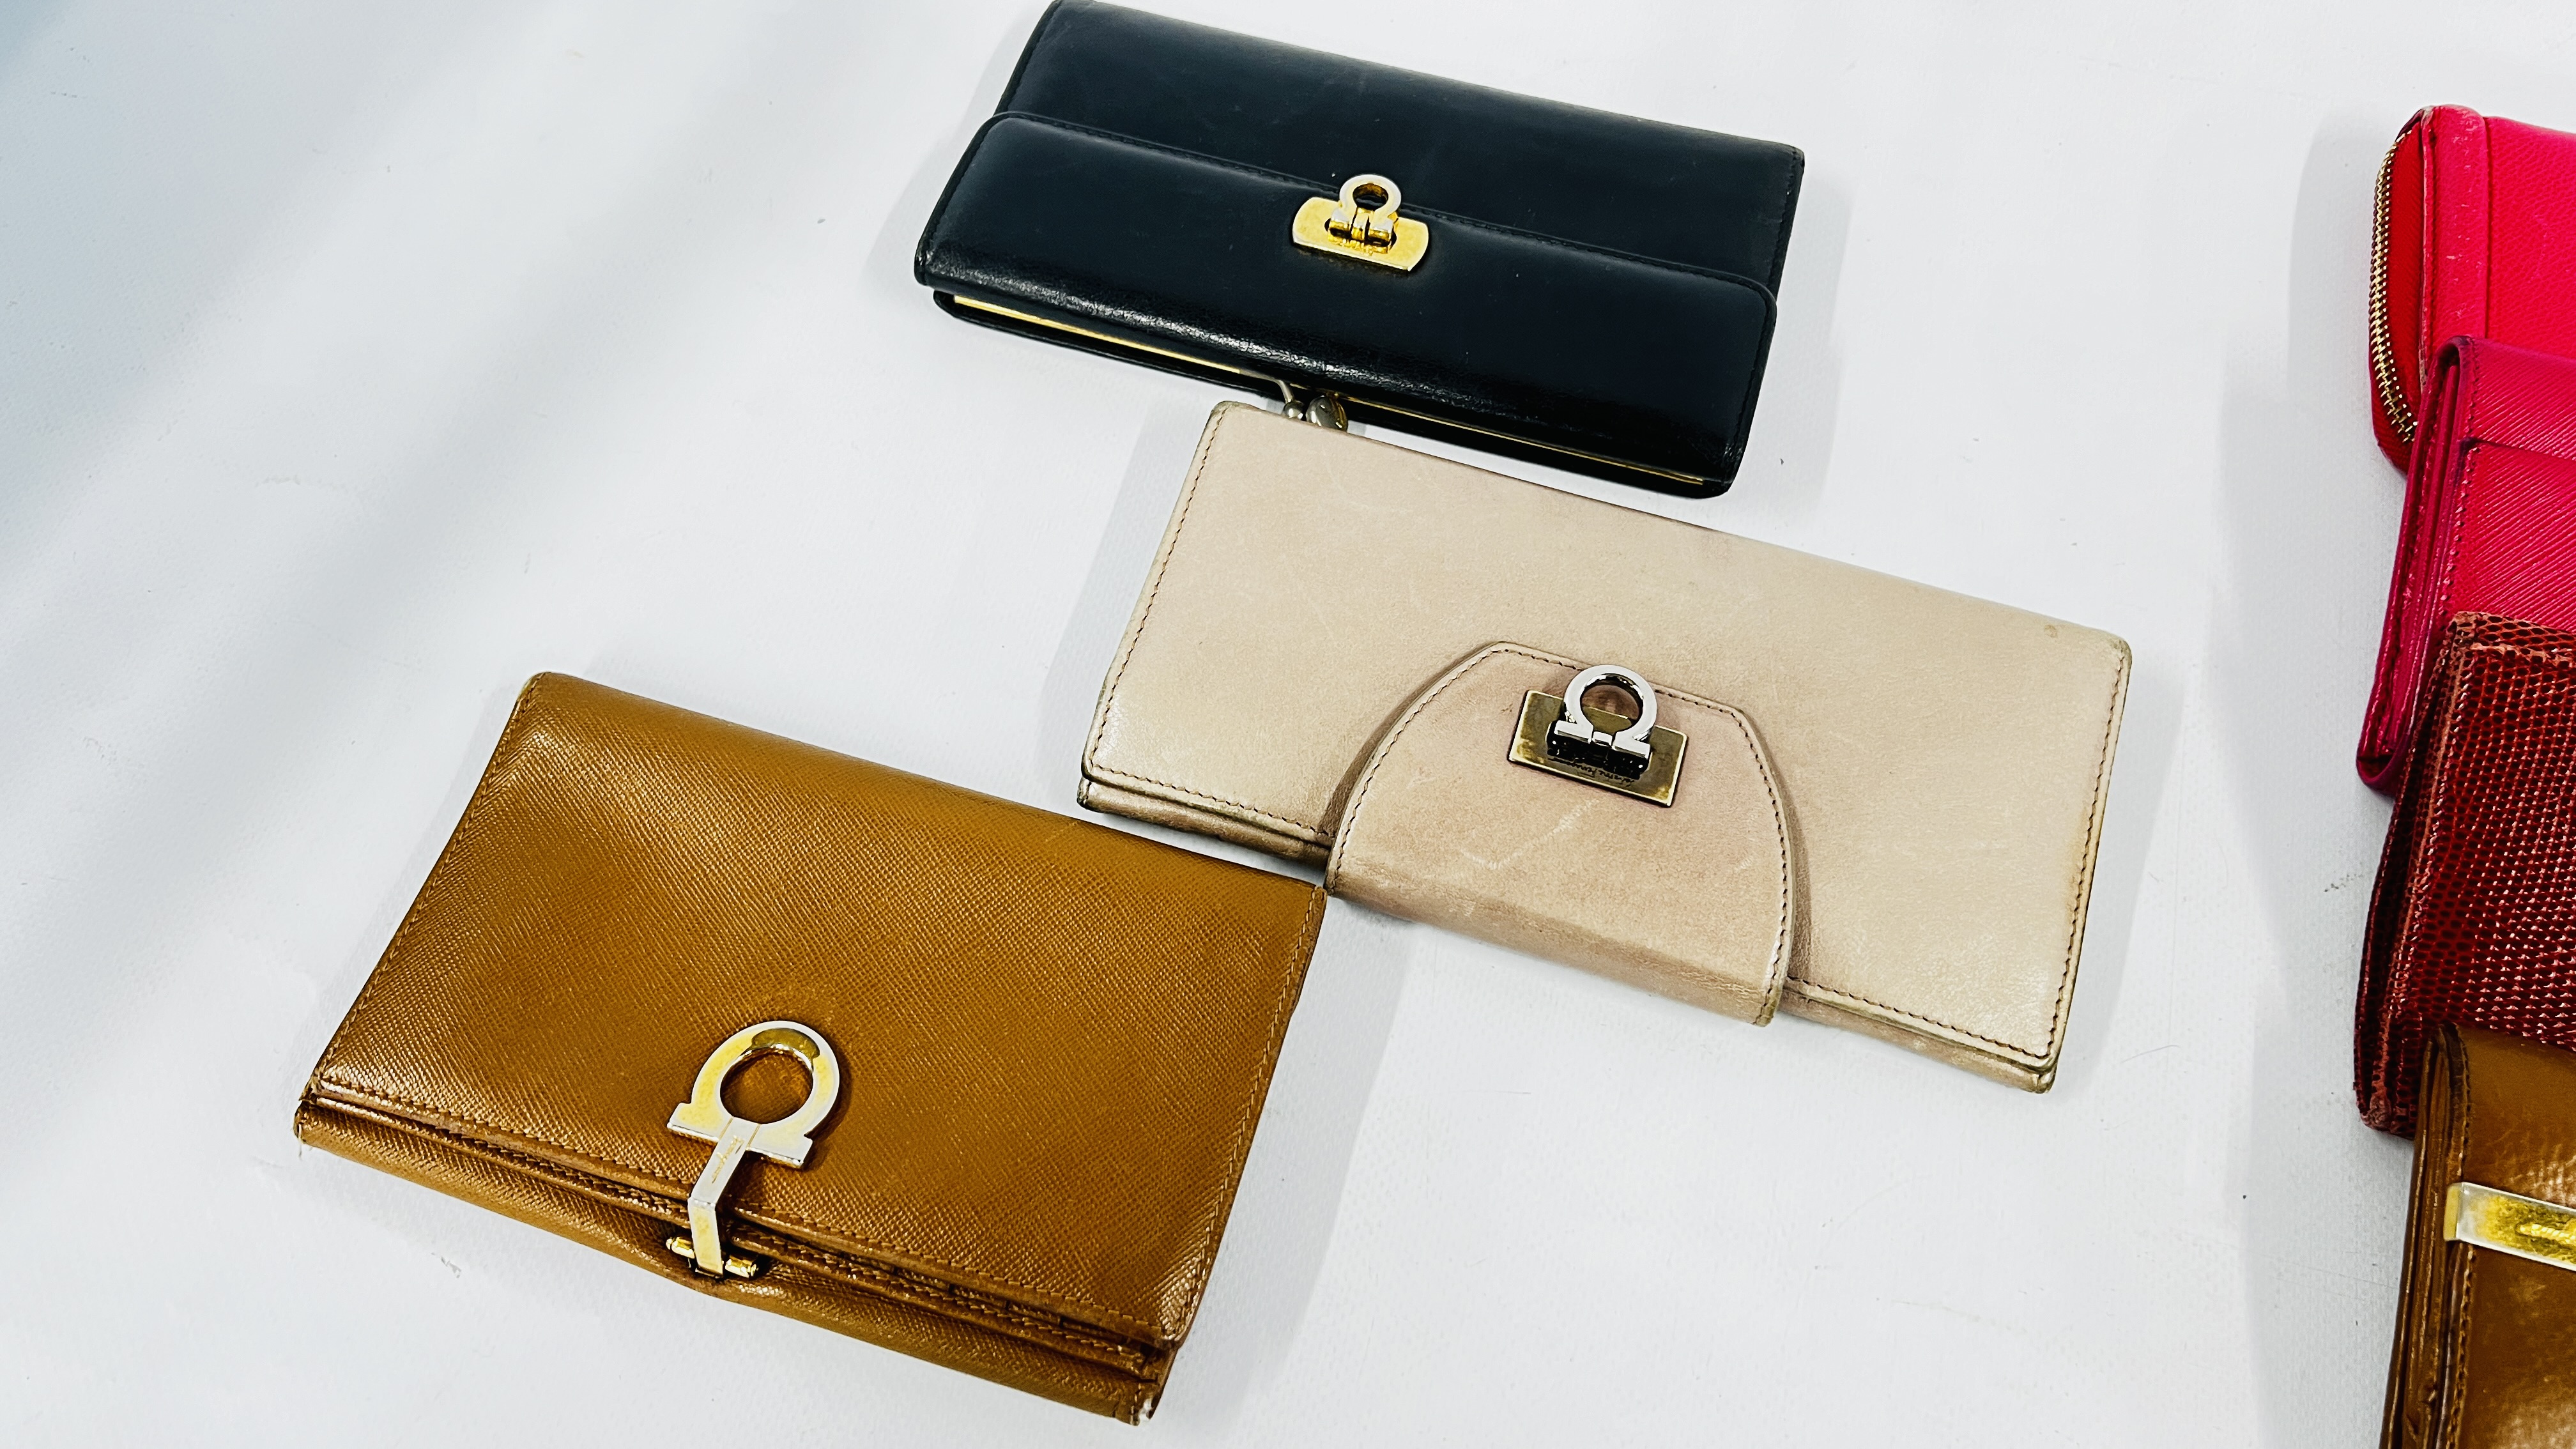 A COLLECTION OF 11 DESIGNER PURSES MARKED "SALVADOR FERRAGAMA". - Image 2 of 5